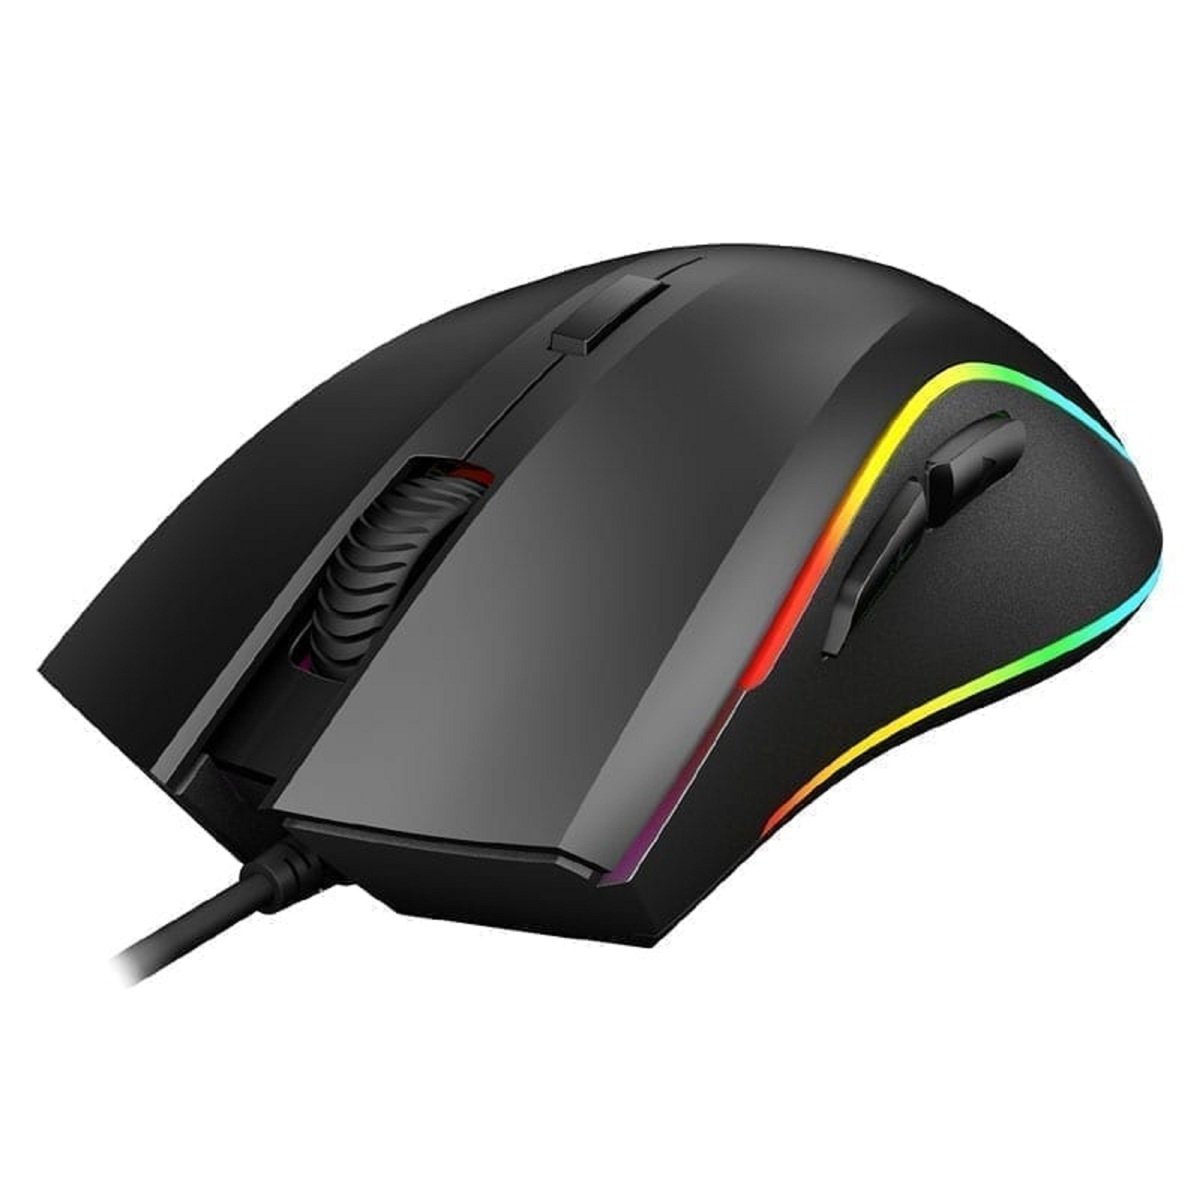 Philips SPK9403B Wired Gaming Mouse